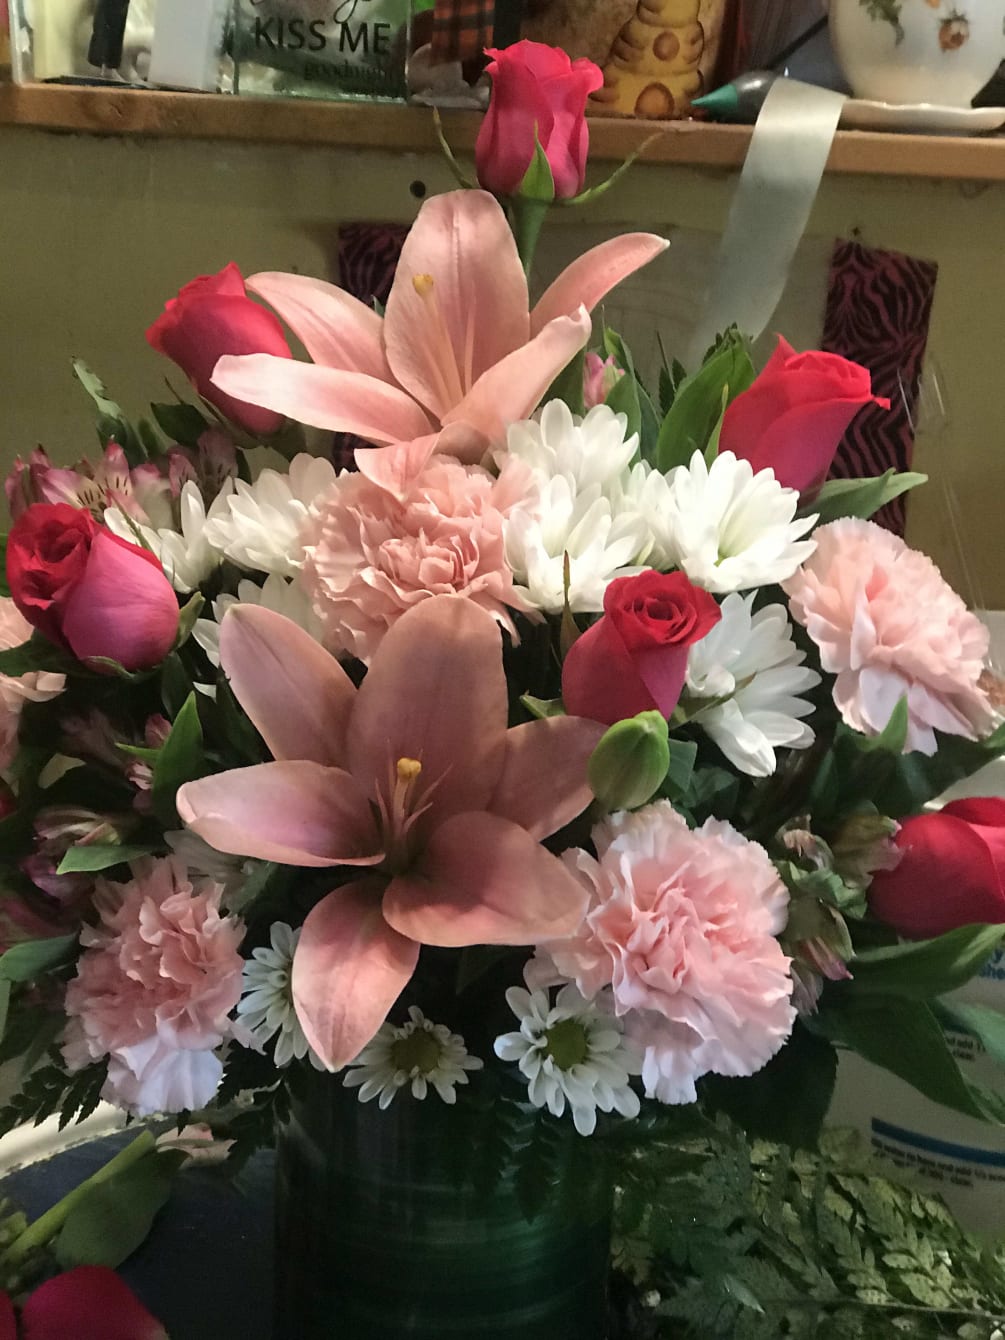 This flower arrangement is sure to put some pink in their cheeks